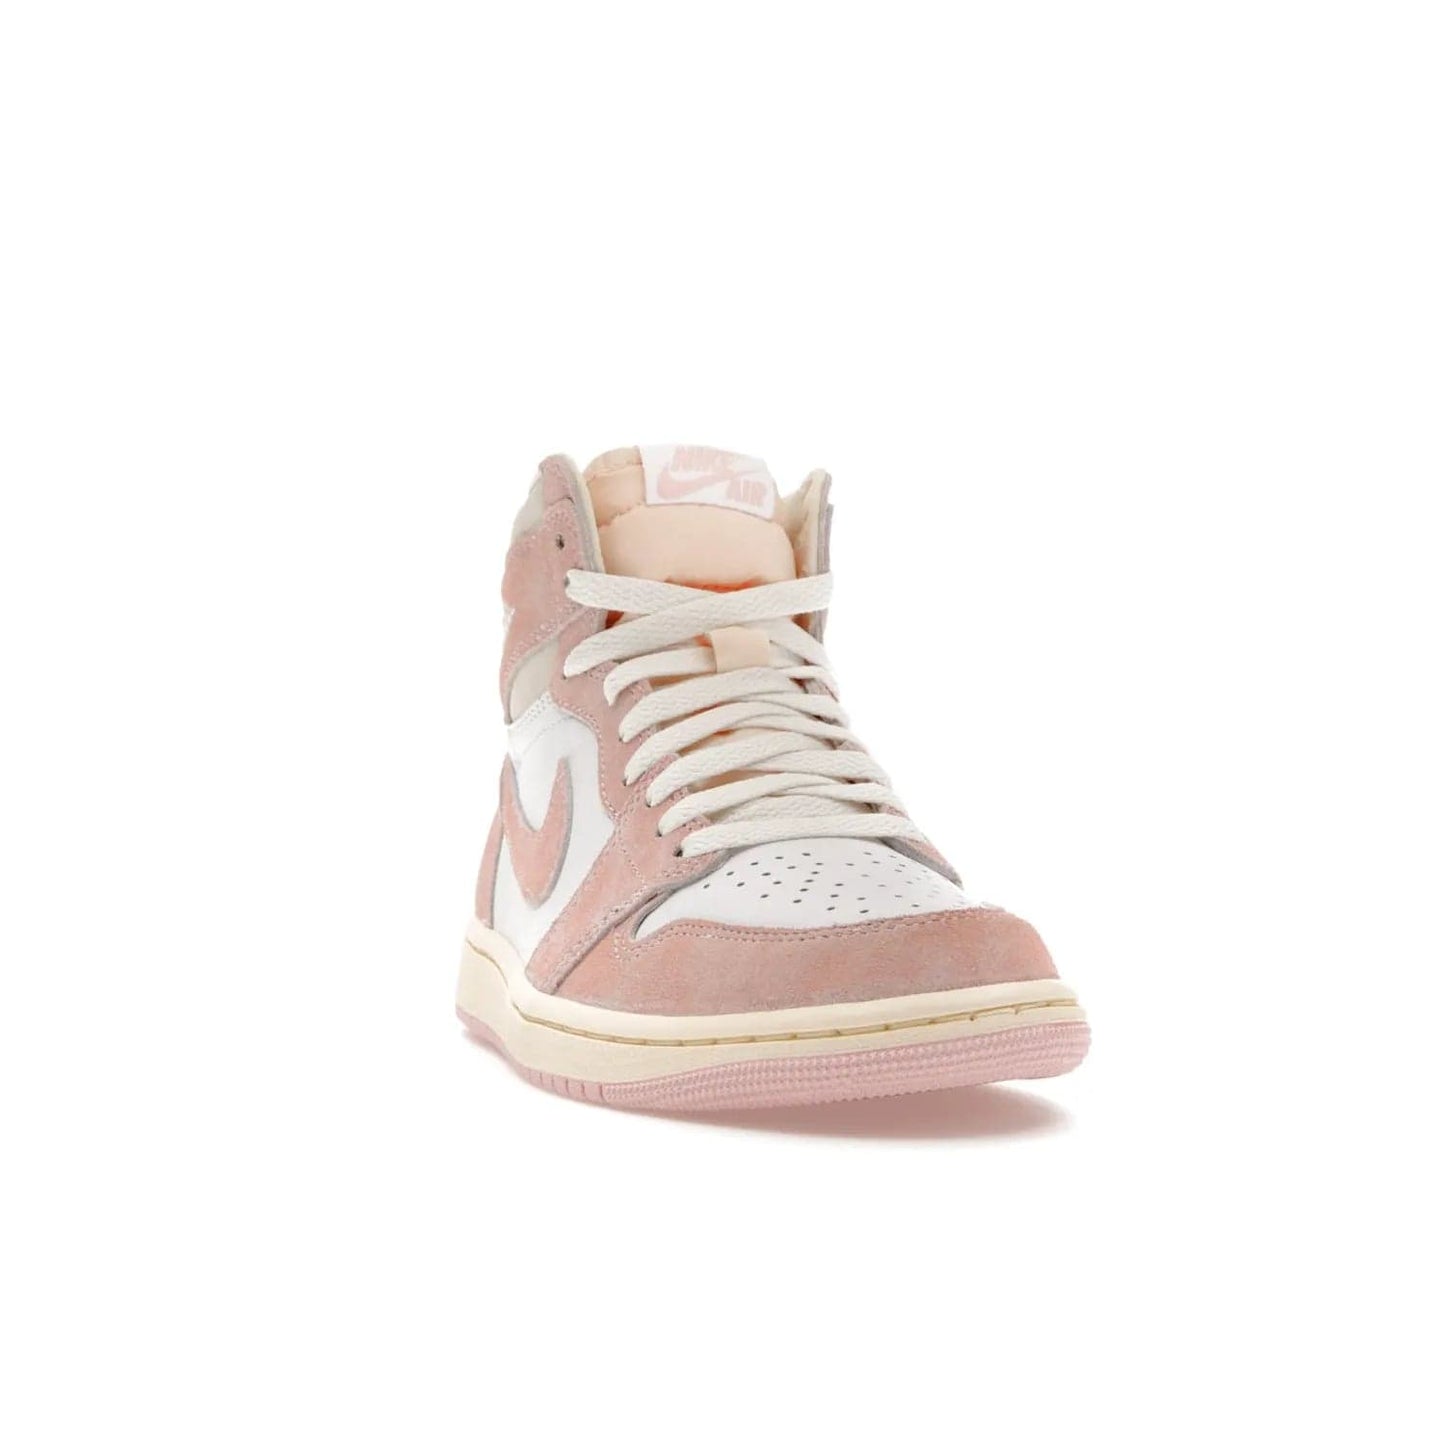 Jordan 1 Retro High OG Washed Pink (Women's) - Image 8 - Only at www.BallersClubKickz.com - Iconic Air Jordan 1 Retro High OG for women with unique pink suede and white leather uppers. Get the timeless look on April 22, 2023.